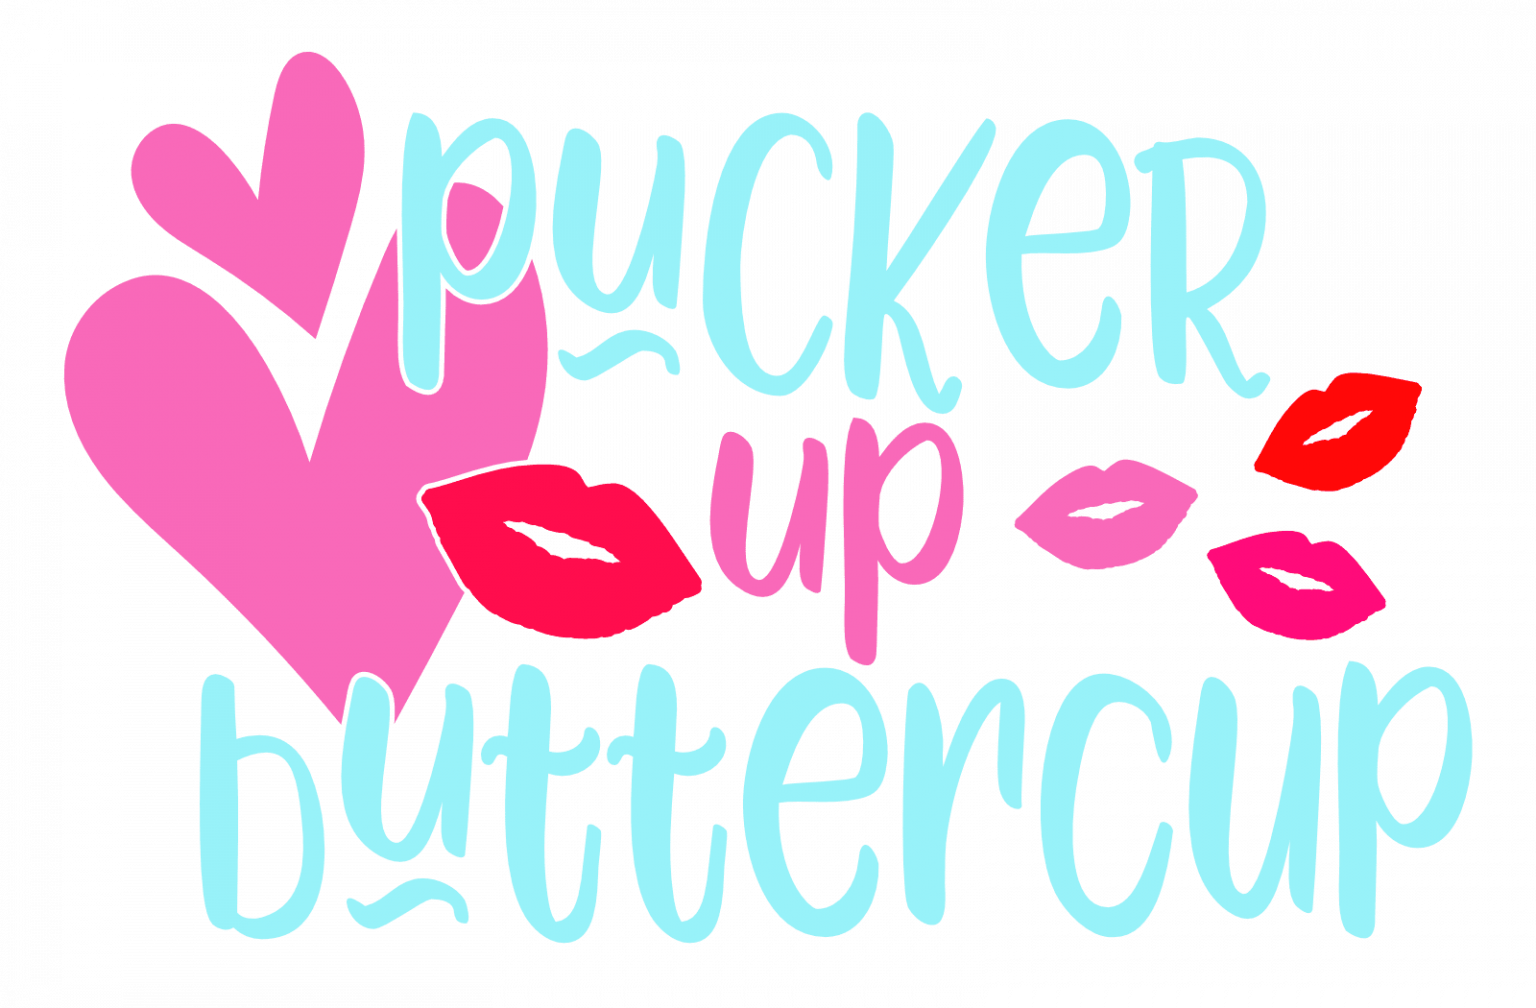 Pucker Up Buttercup, Funny Sayings Free Svg File - SVG Heart